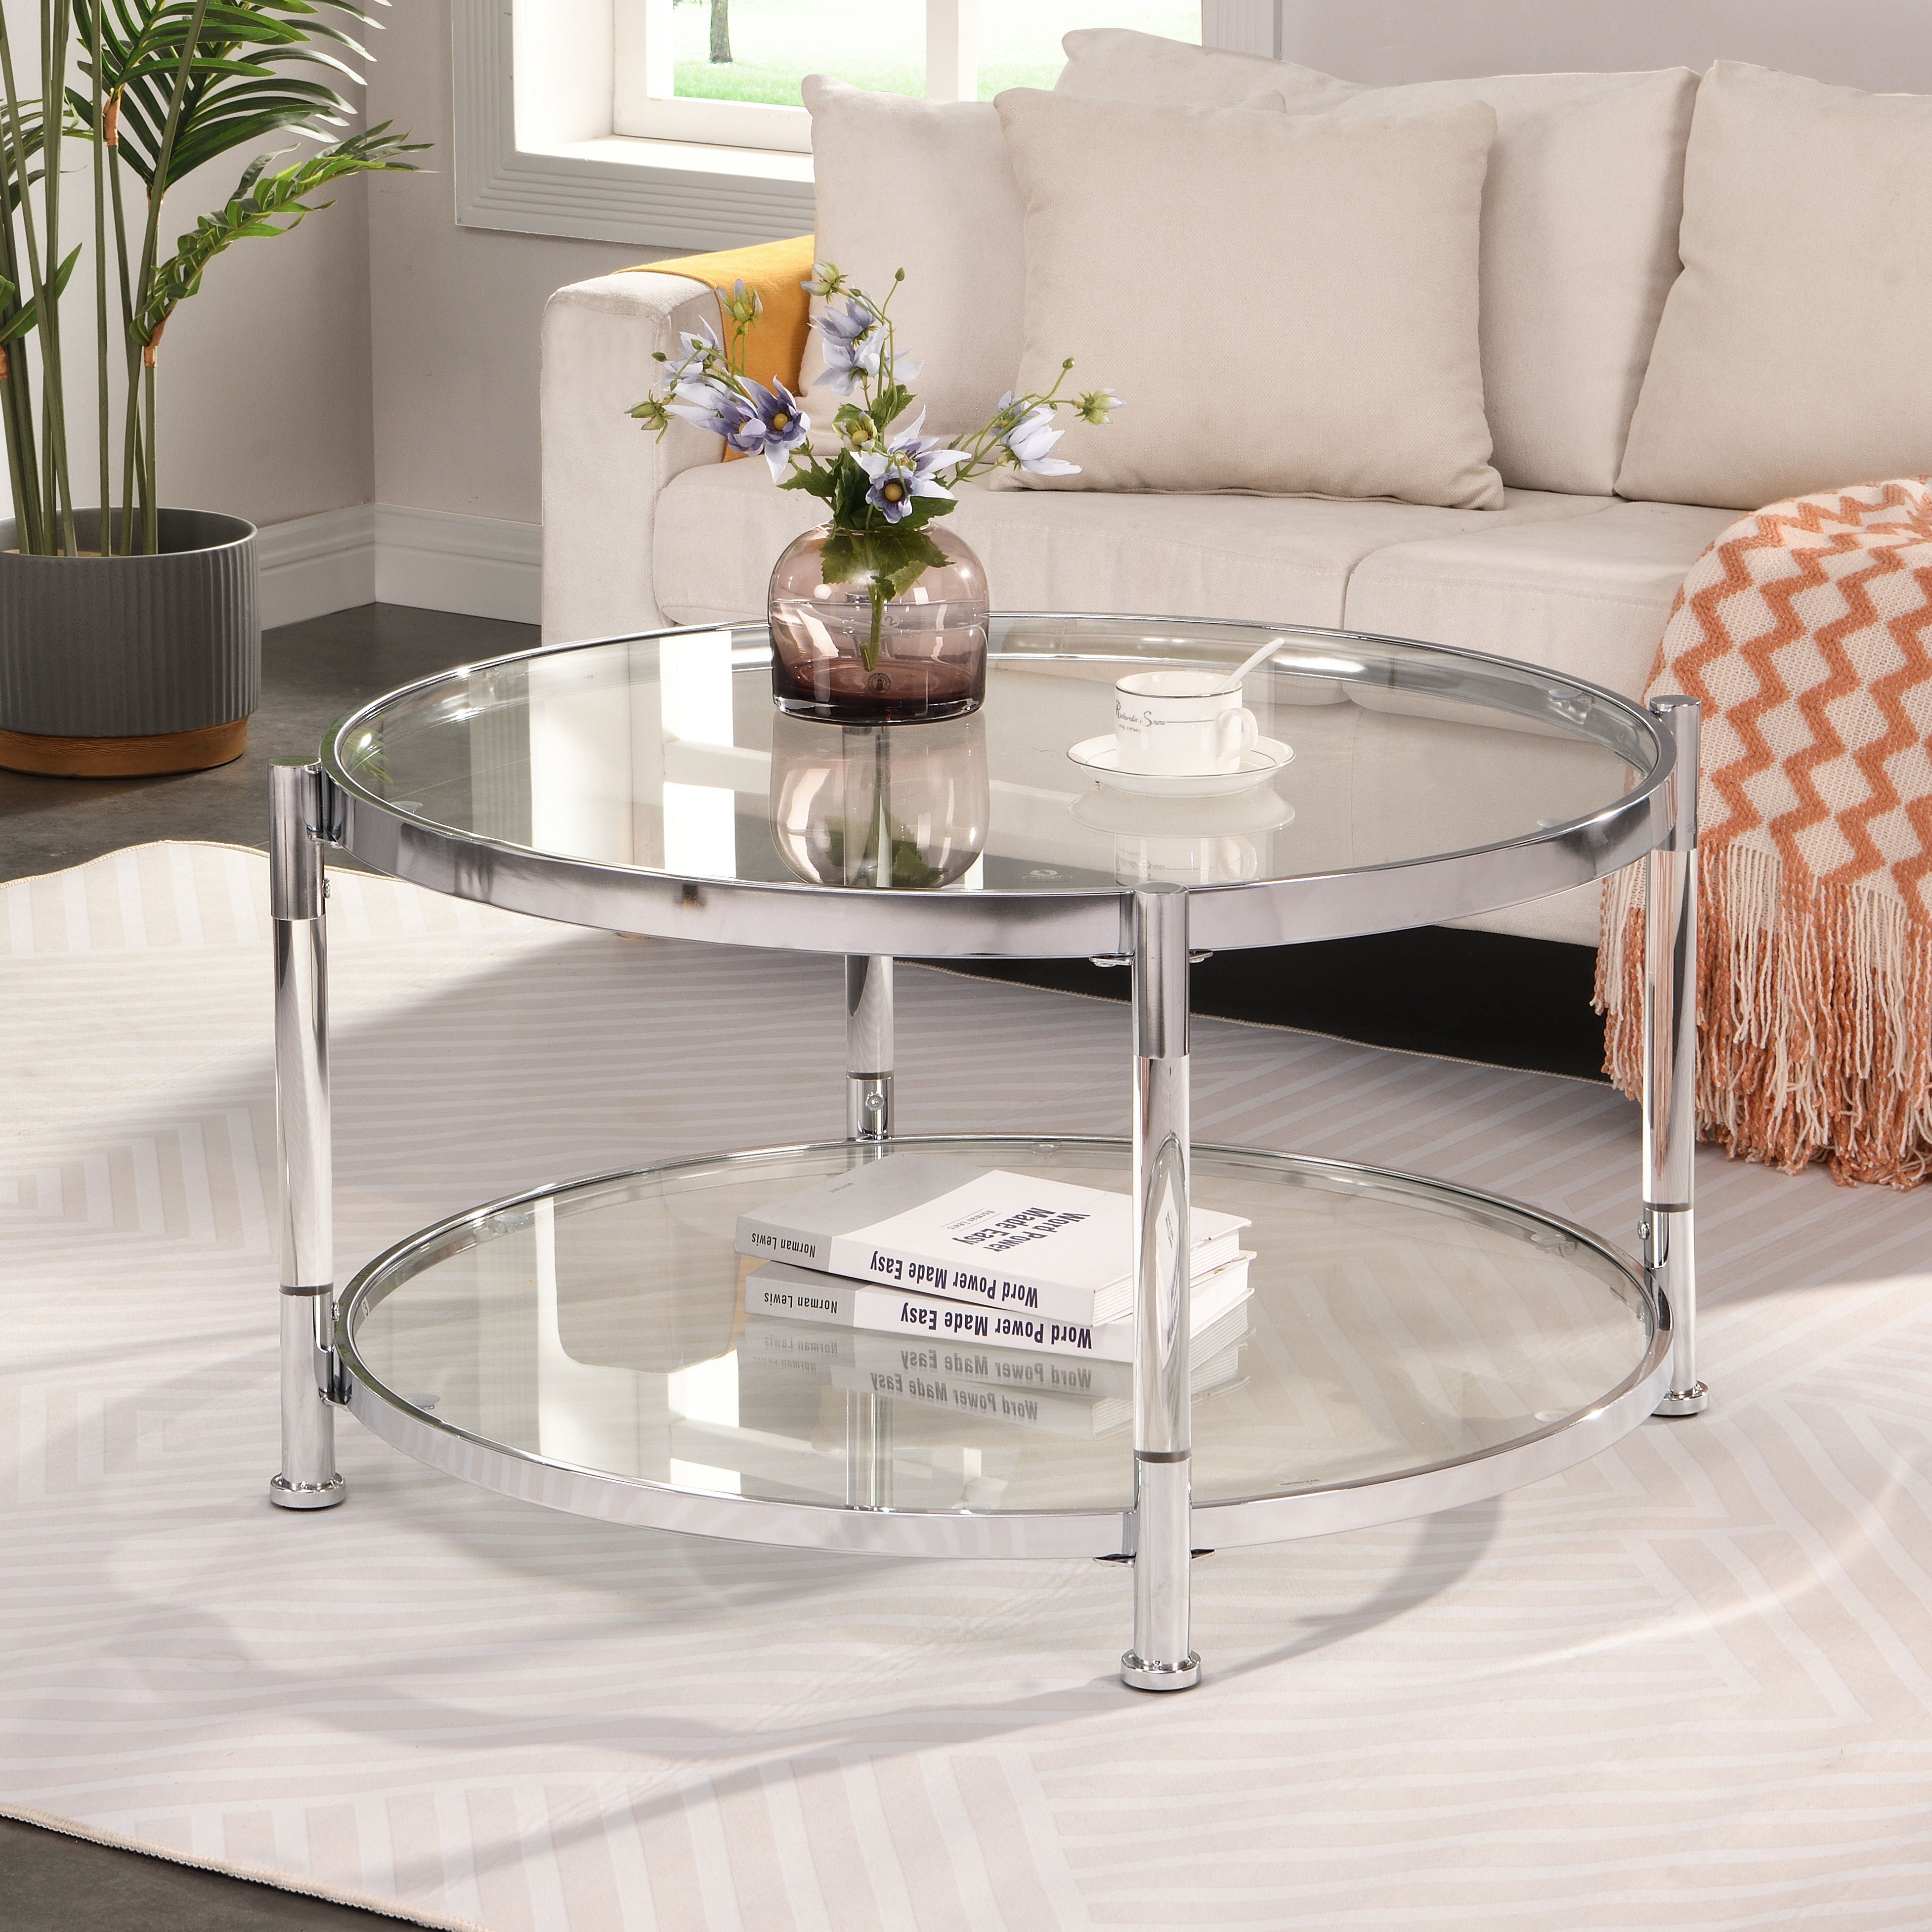 Contemporary Acrylic Coffee Table, 32.3'' Round Tempered Glass Coffee Table, Chrome / Silver Coffee Table For Living Room